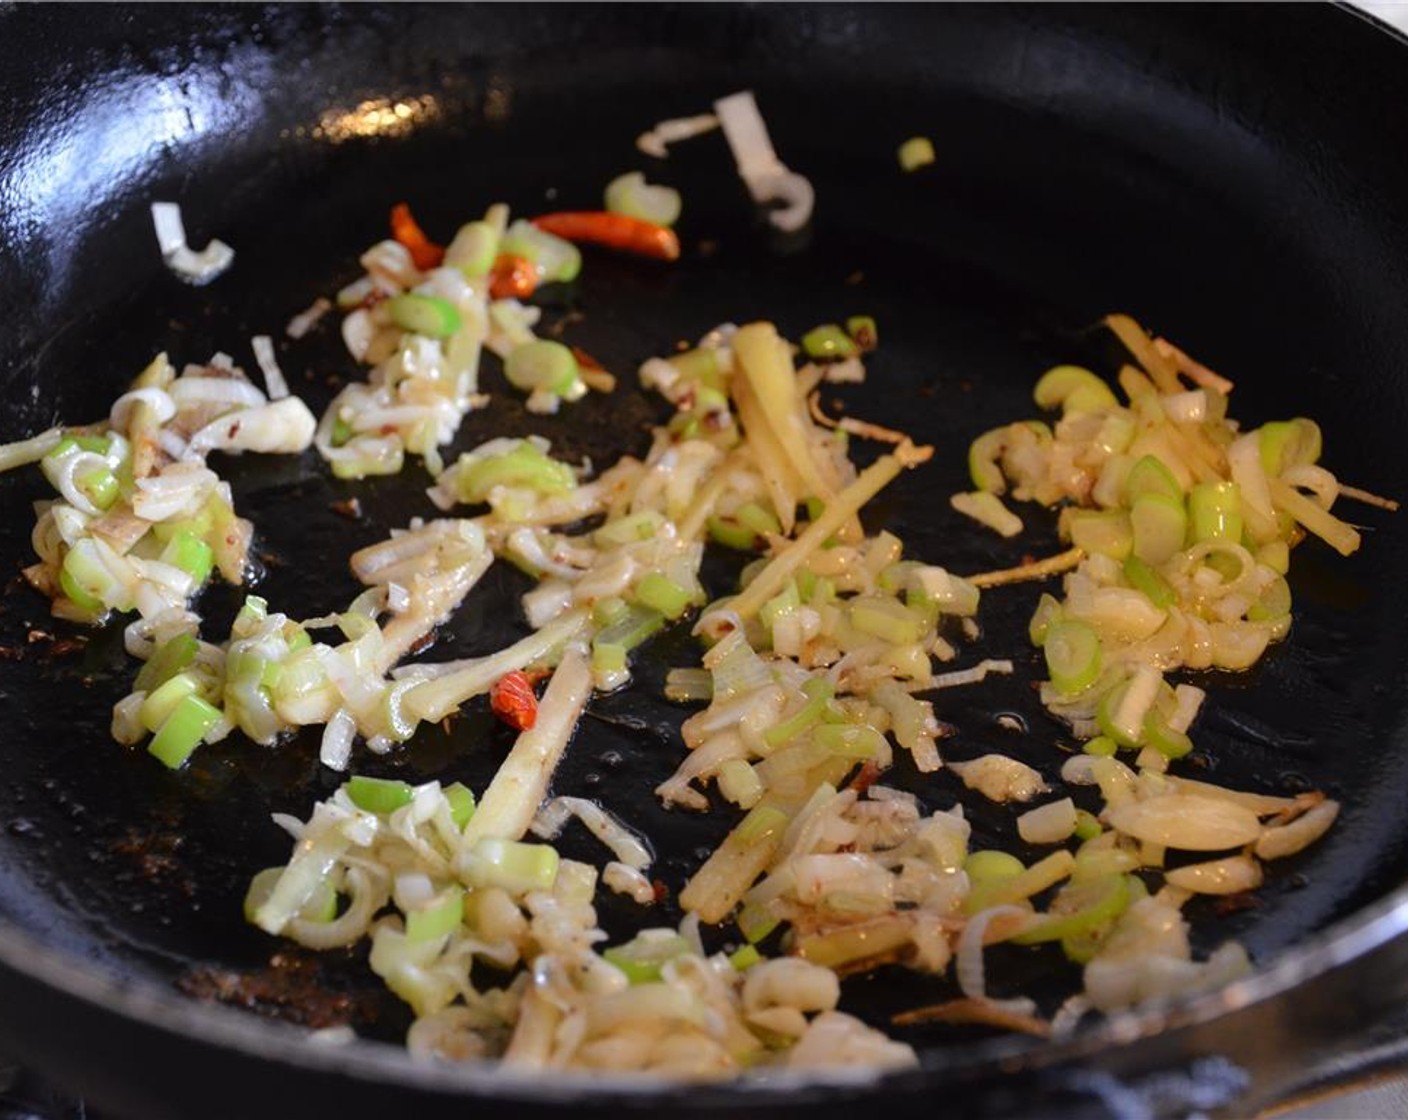 step 7 Add Canola Oil (1 Tbsp) to the wok, swirling to coat bottom and sides. Add chiles, ginger, garlic, and leek and cook, tossing constantly, until fragrant, about 30 seconds.